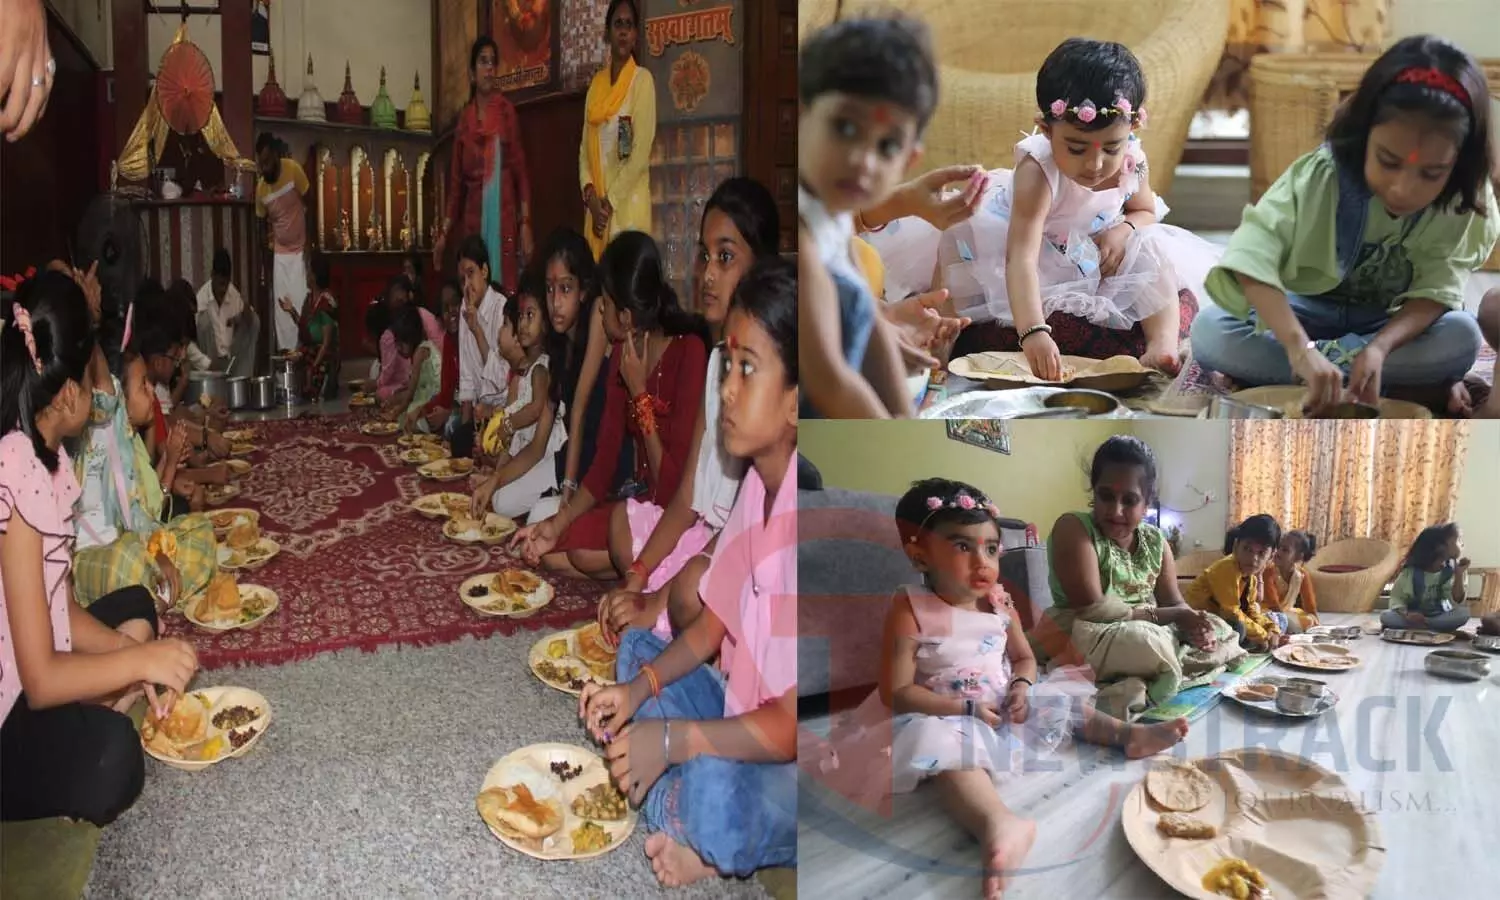 On the occasion of Navratri, people fed the girl on the day of Navami, blessed her feet